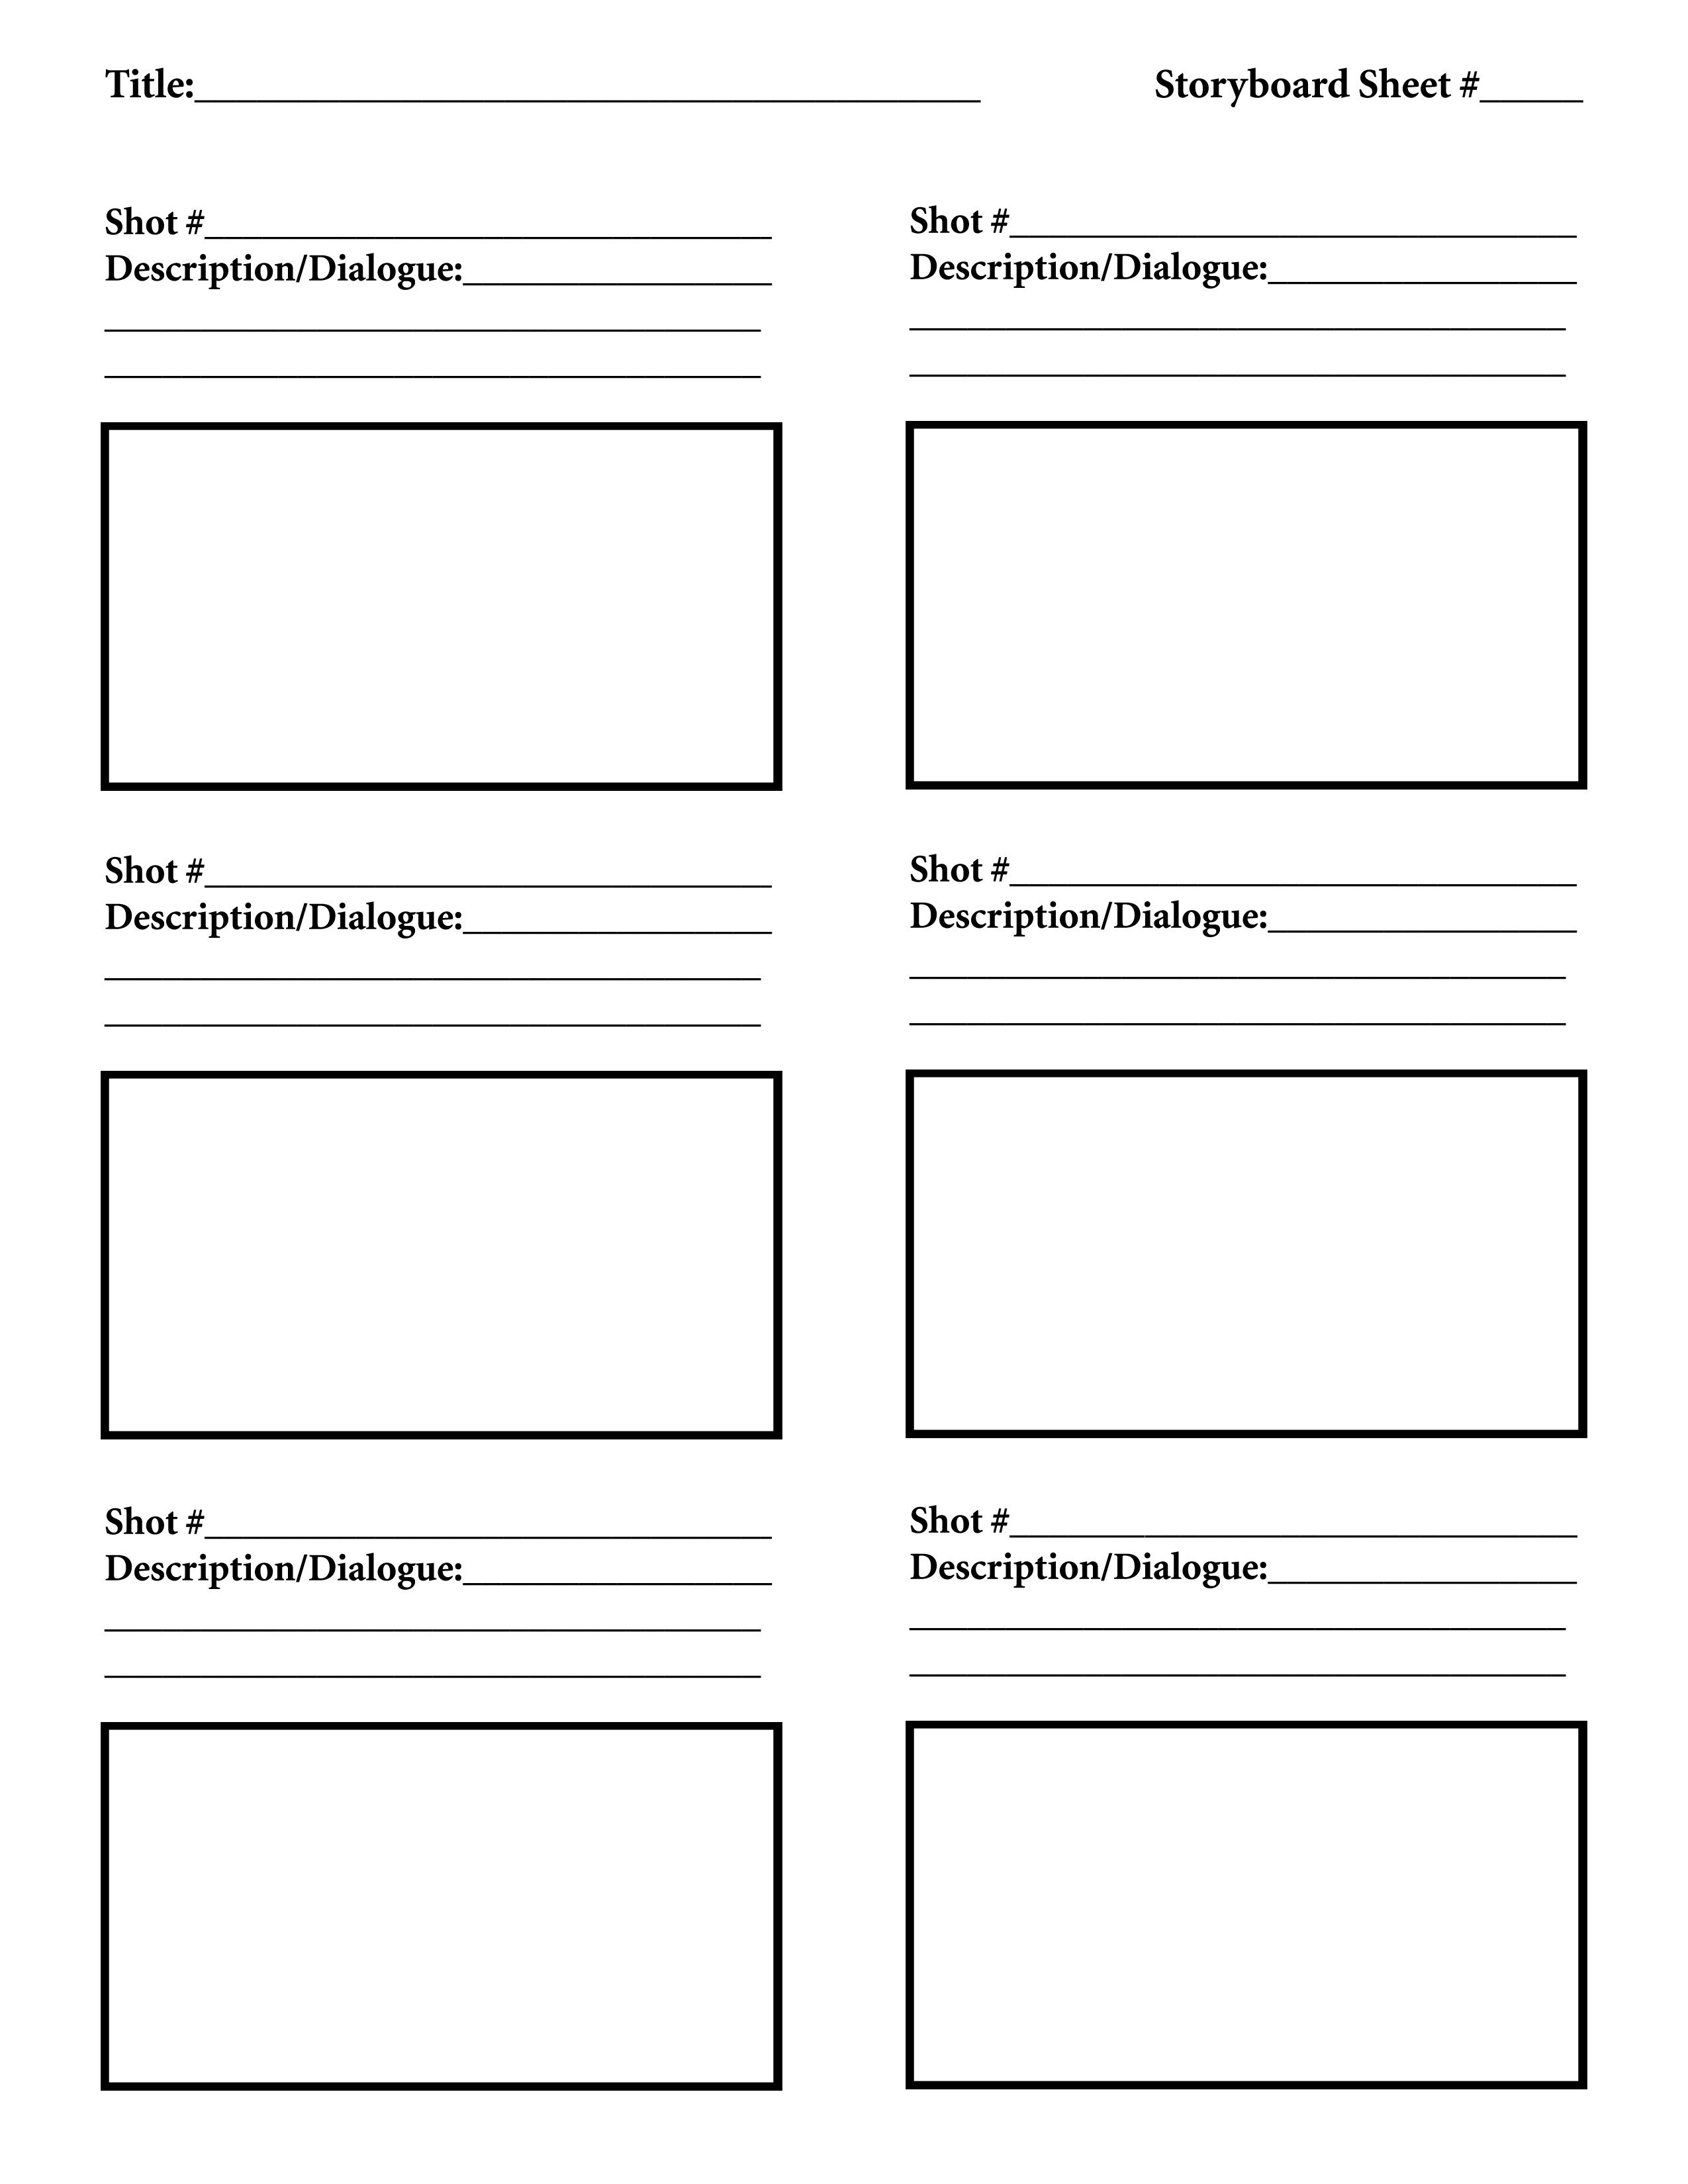 Download FREE Storyboard Template Tutorials In